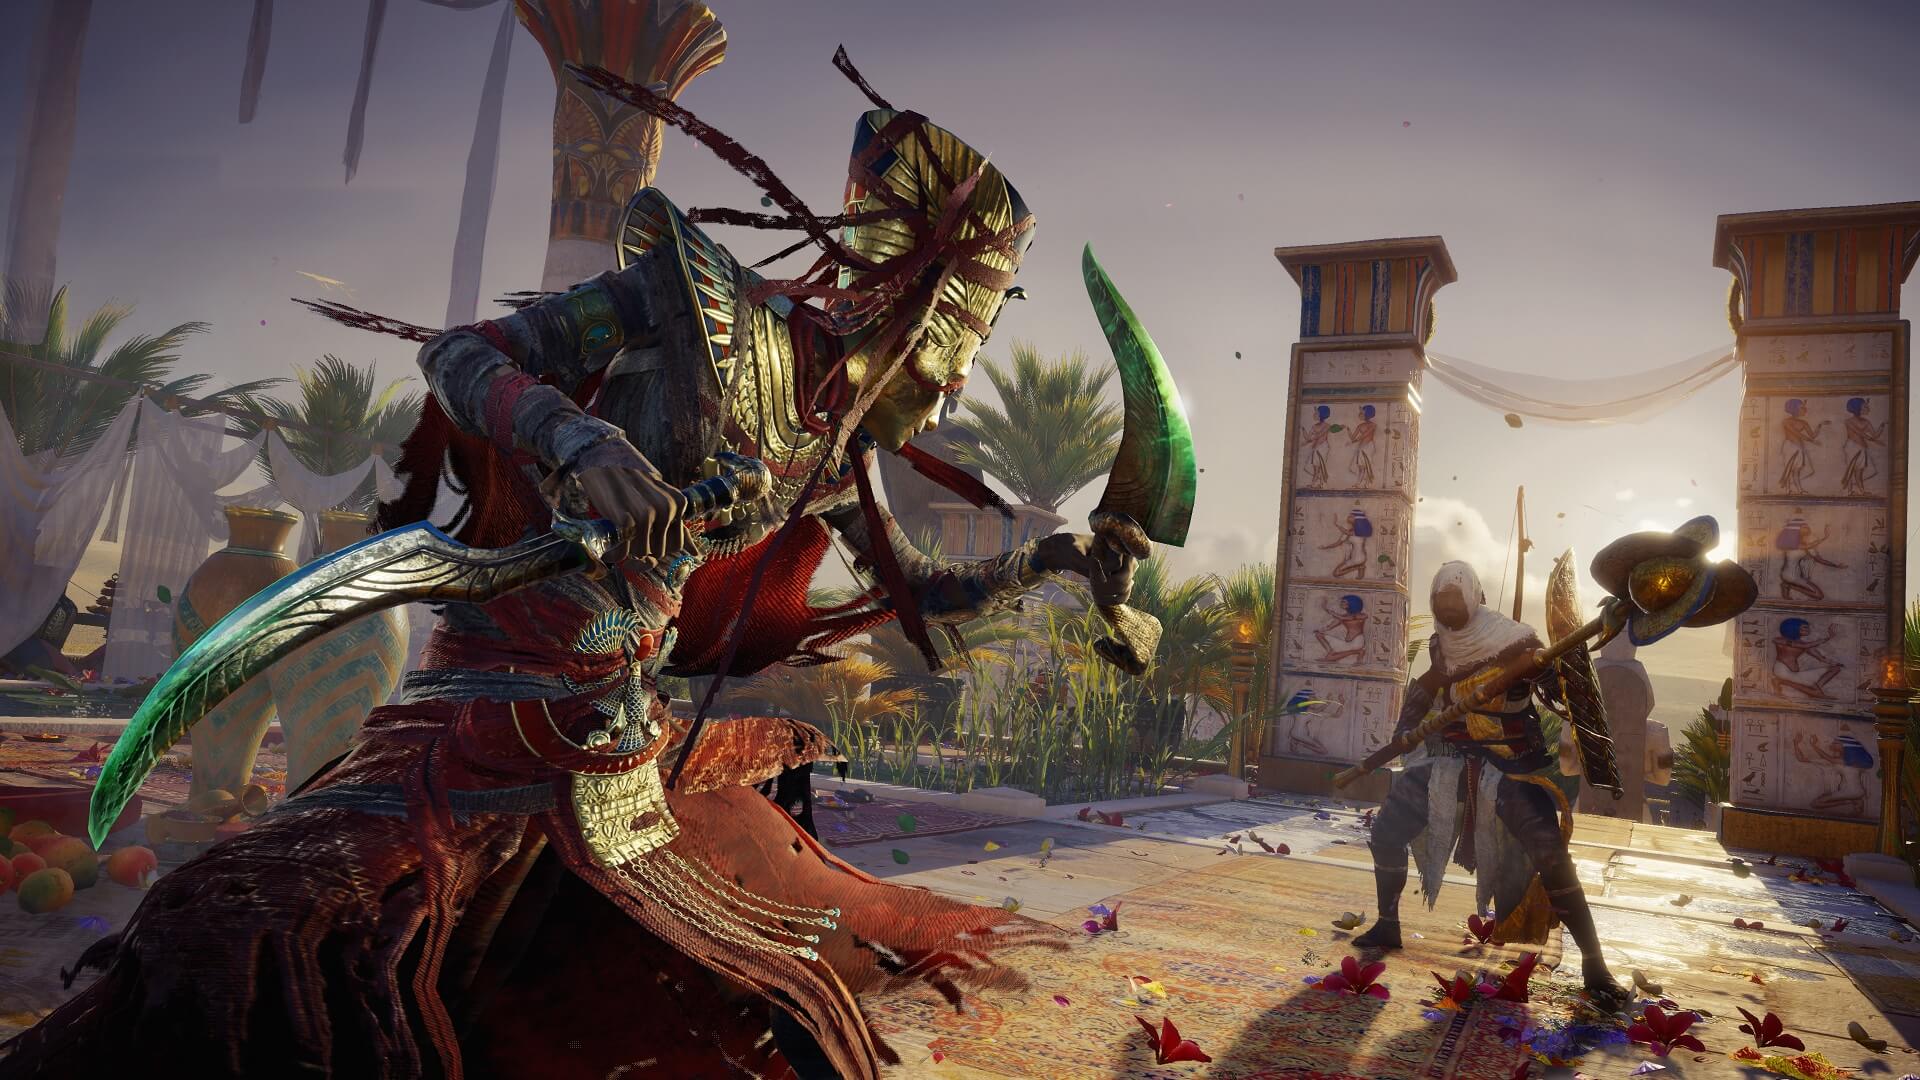 Assassin's Creed Odyssey - Will Have Its Own Themed Obstacle Course